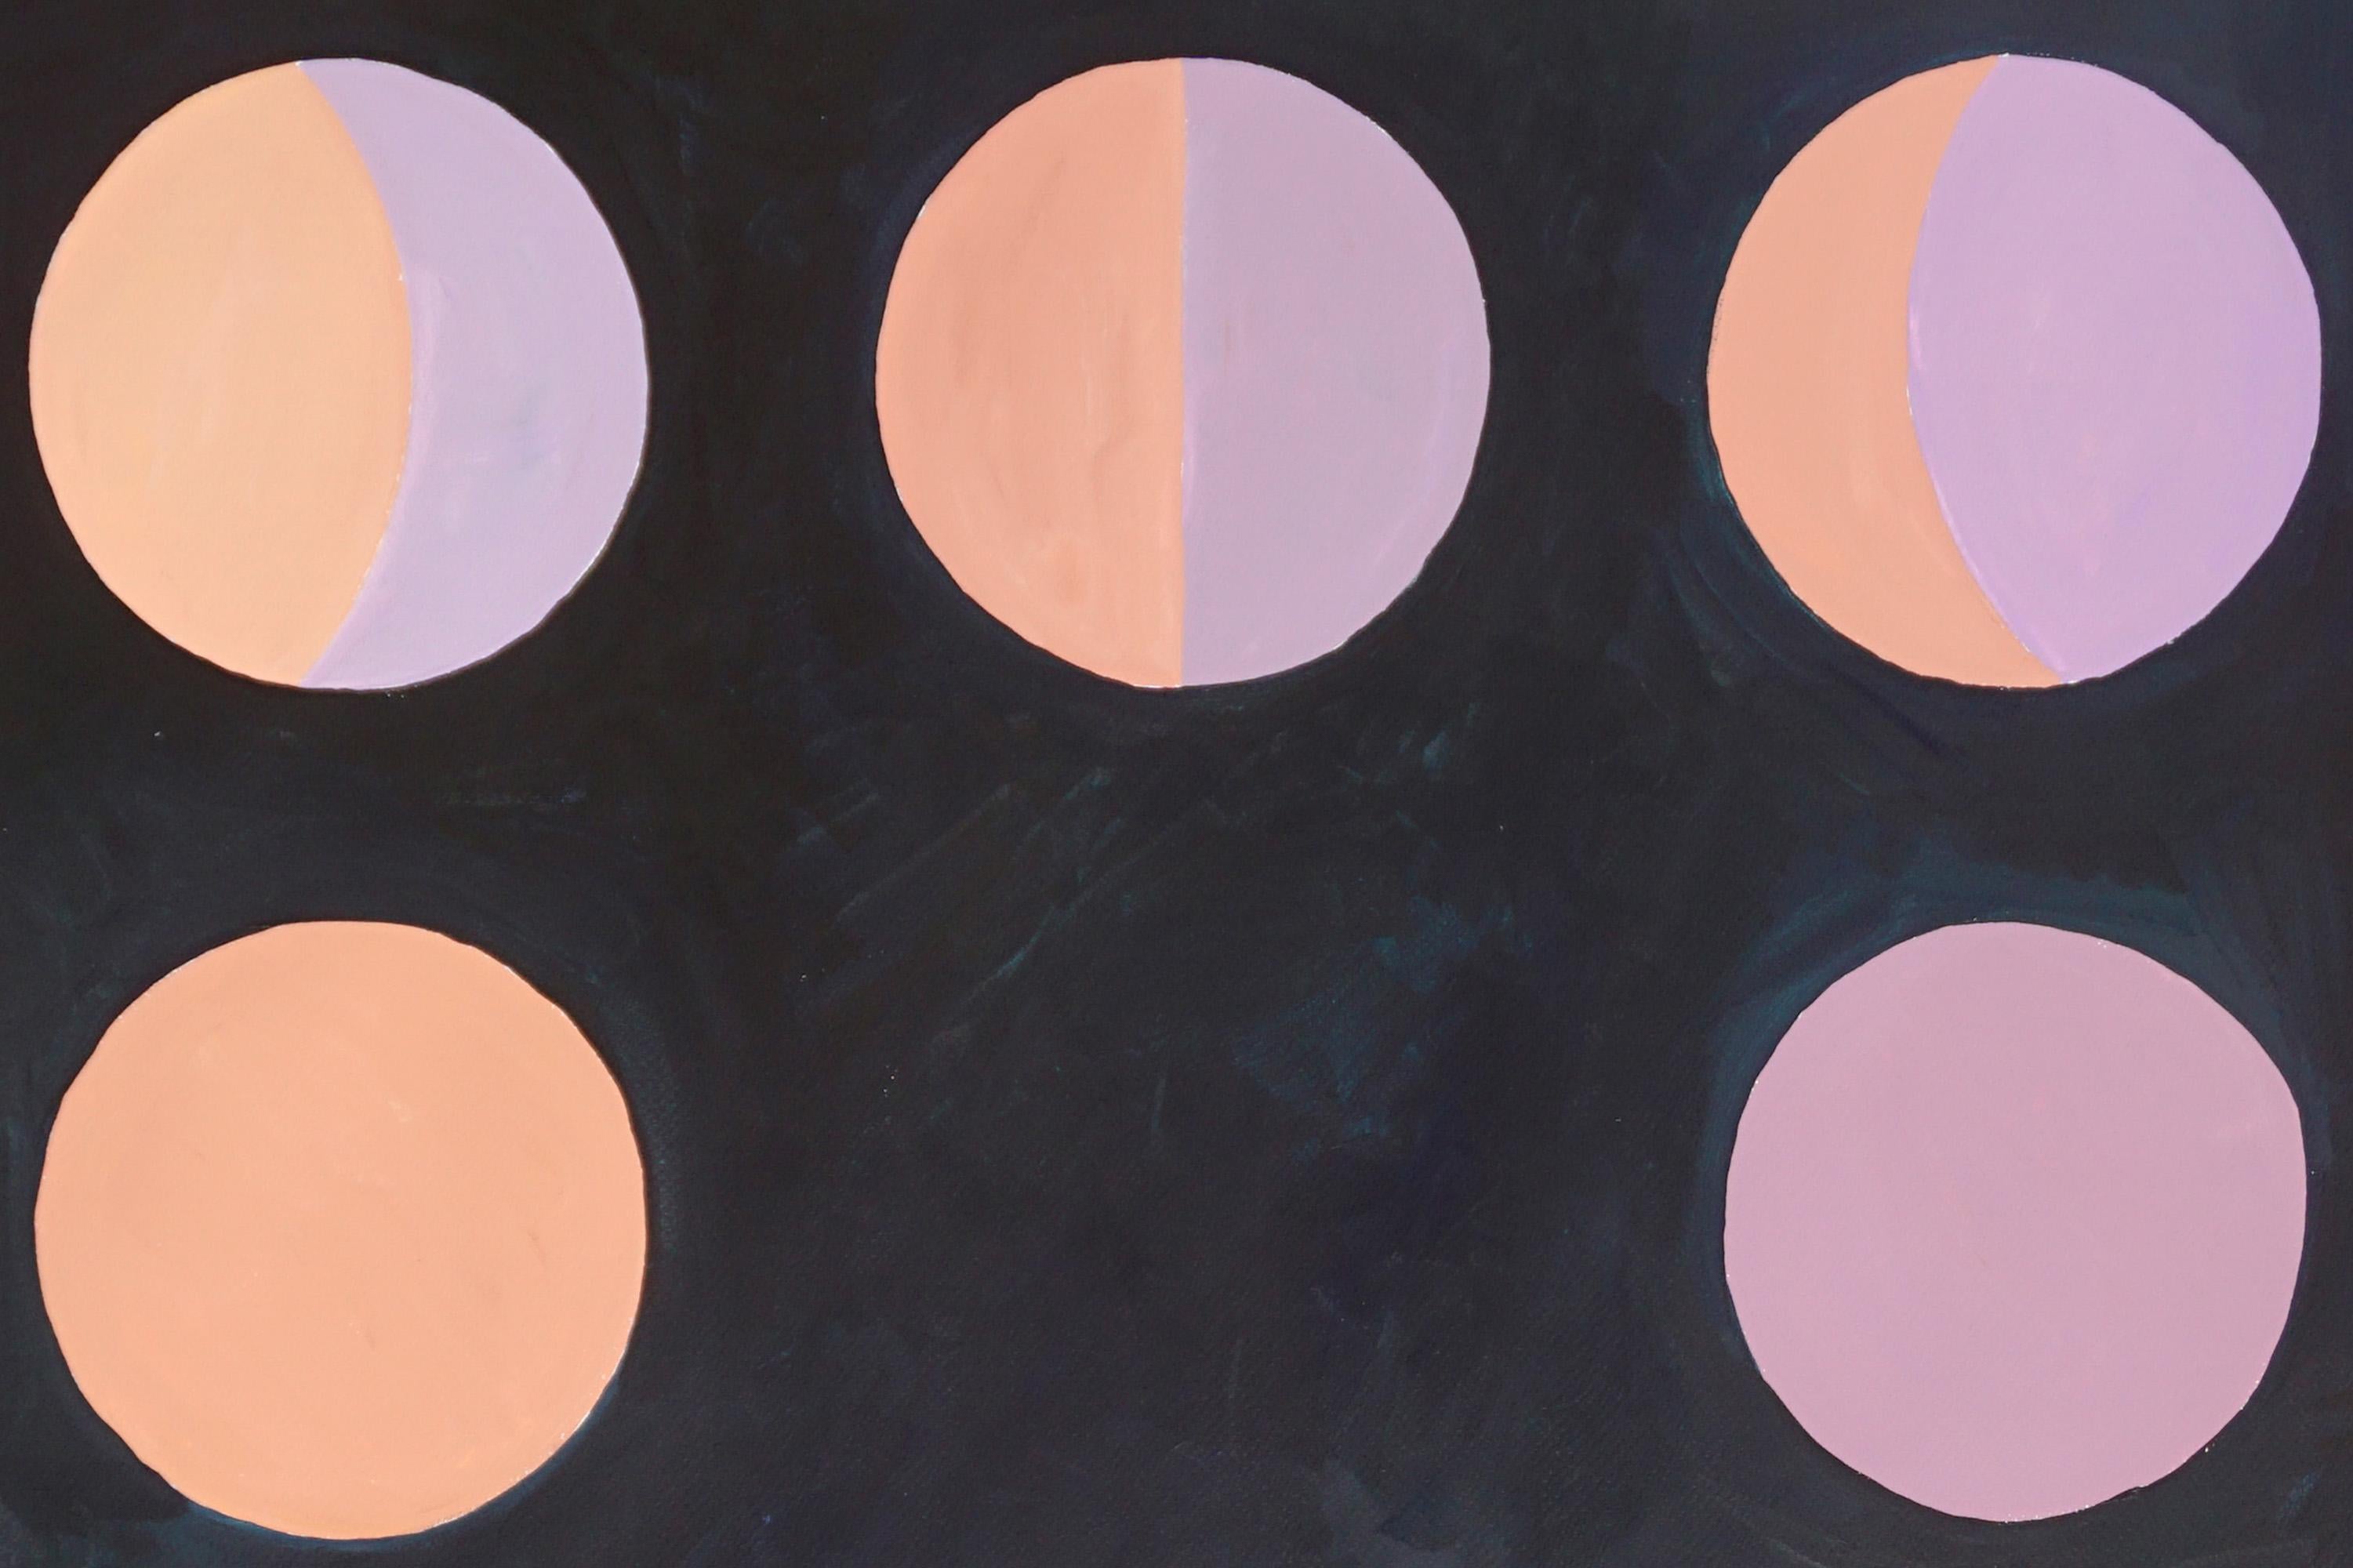 Moon Phase Scheme on Black, Mauve and Coral Circles, Primary Geometry Astronomy  - Bauhaus Painting by Natalia Roman